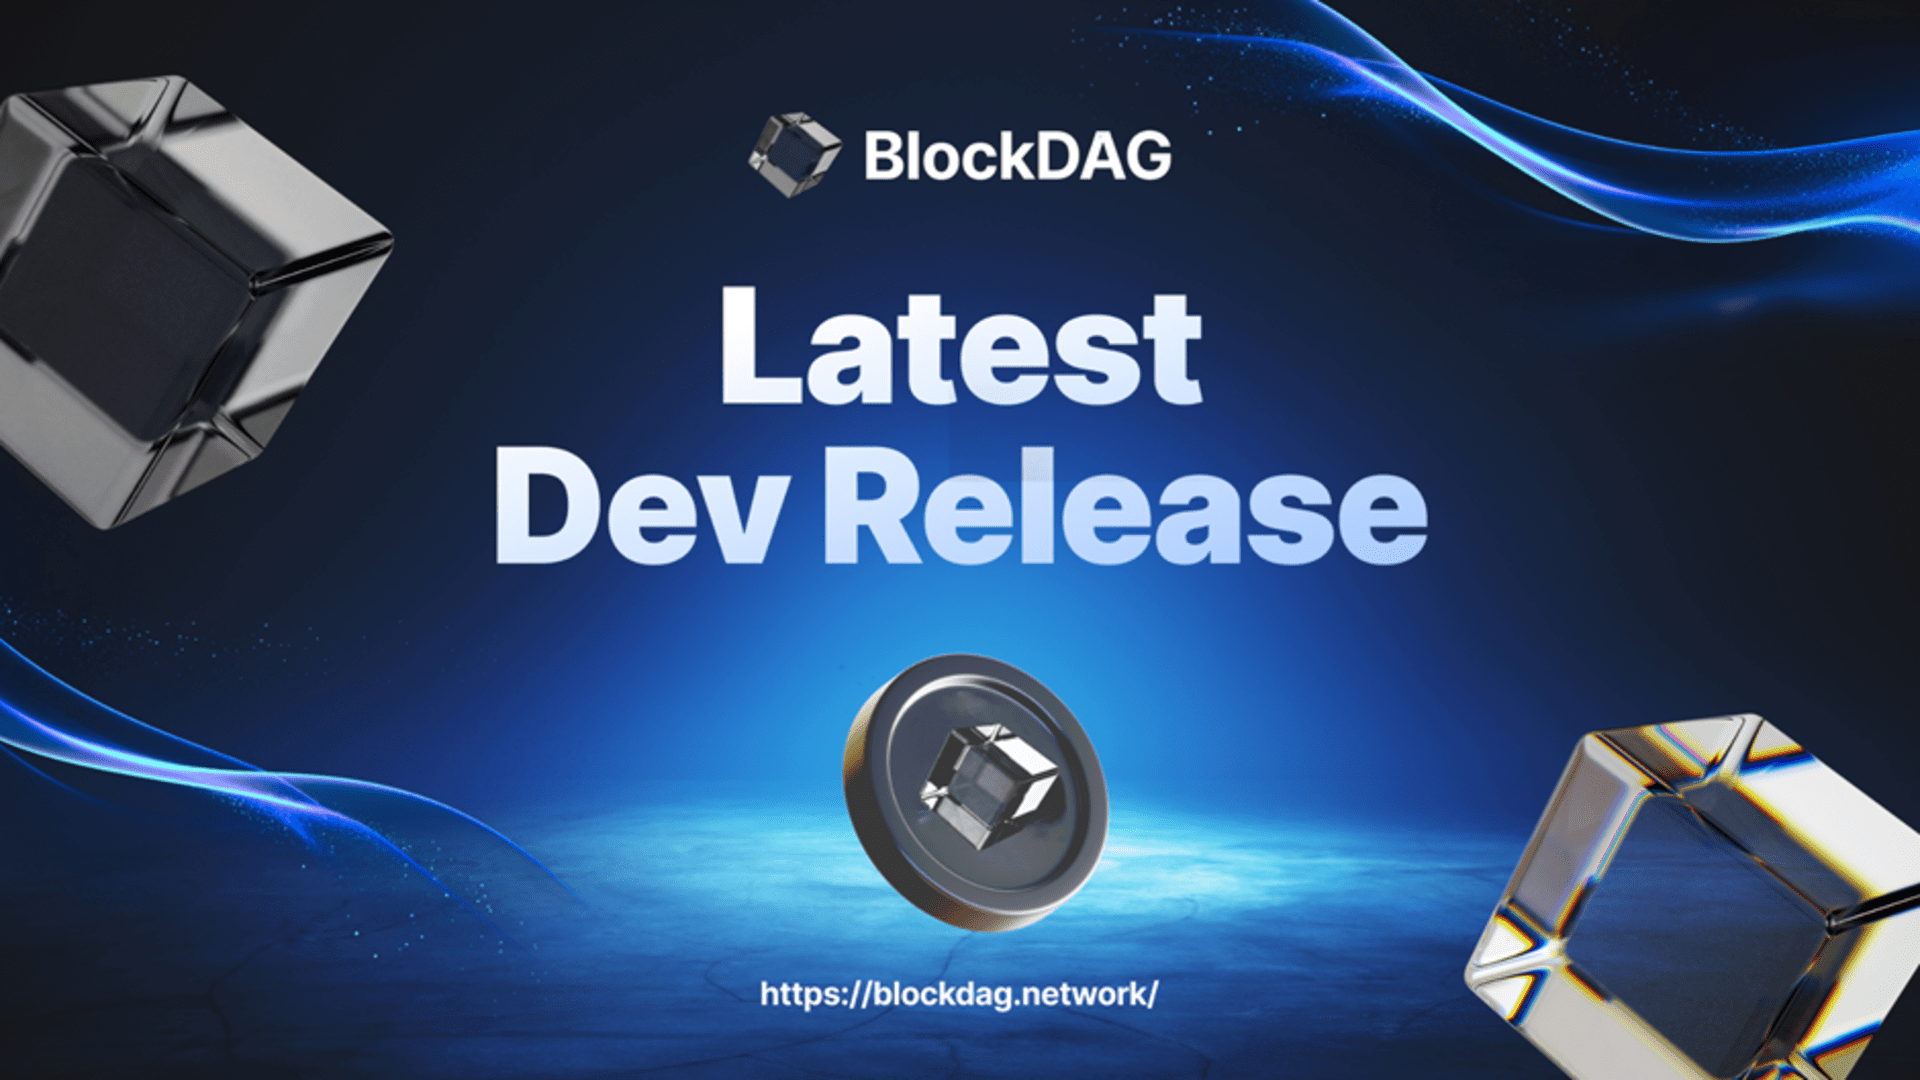 Dev Release 31: BlockDAG’s SHA-3 Upgrade Drive Crypto Mining Innovation, Nearly 5800 Miners Sold